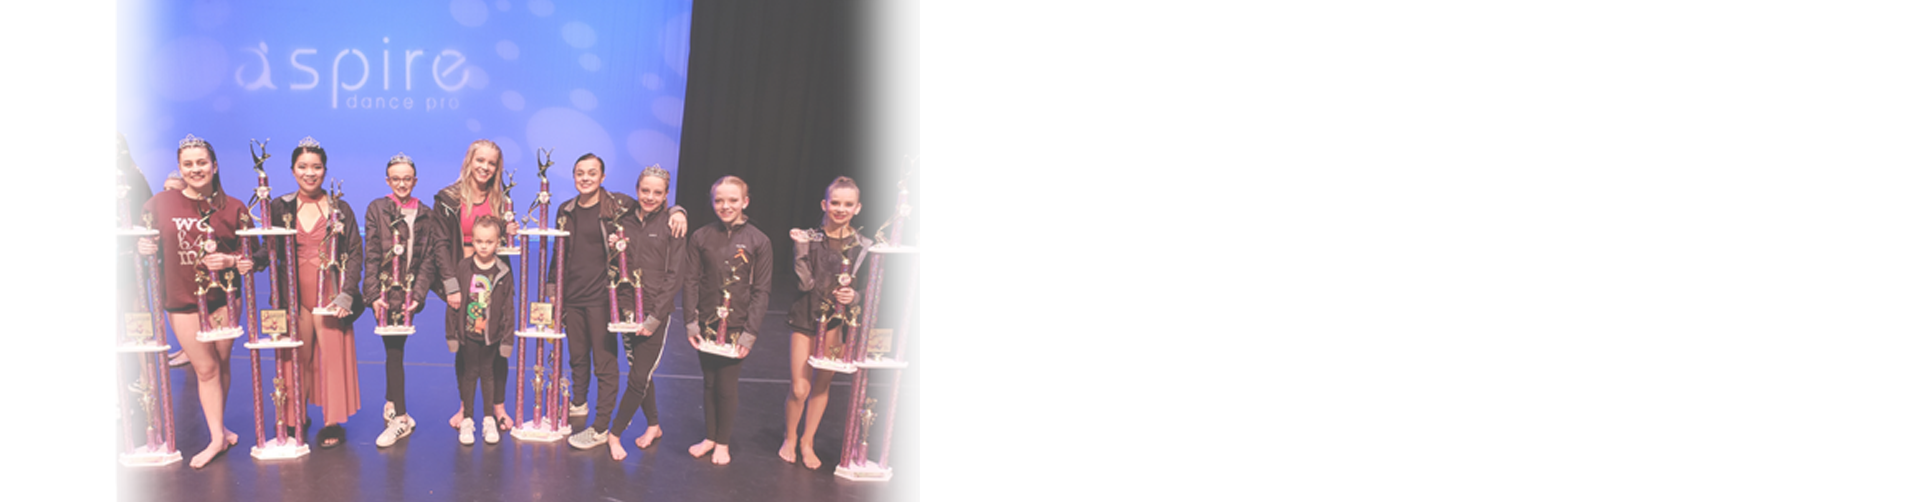 Personalized Awards at Aspire Dance Pro Competitions